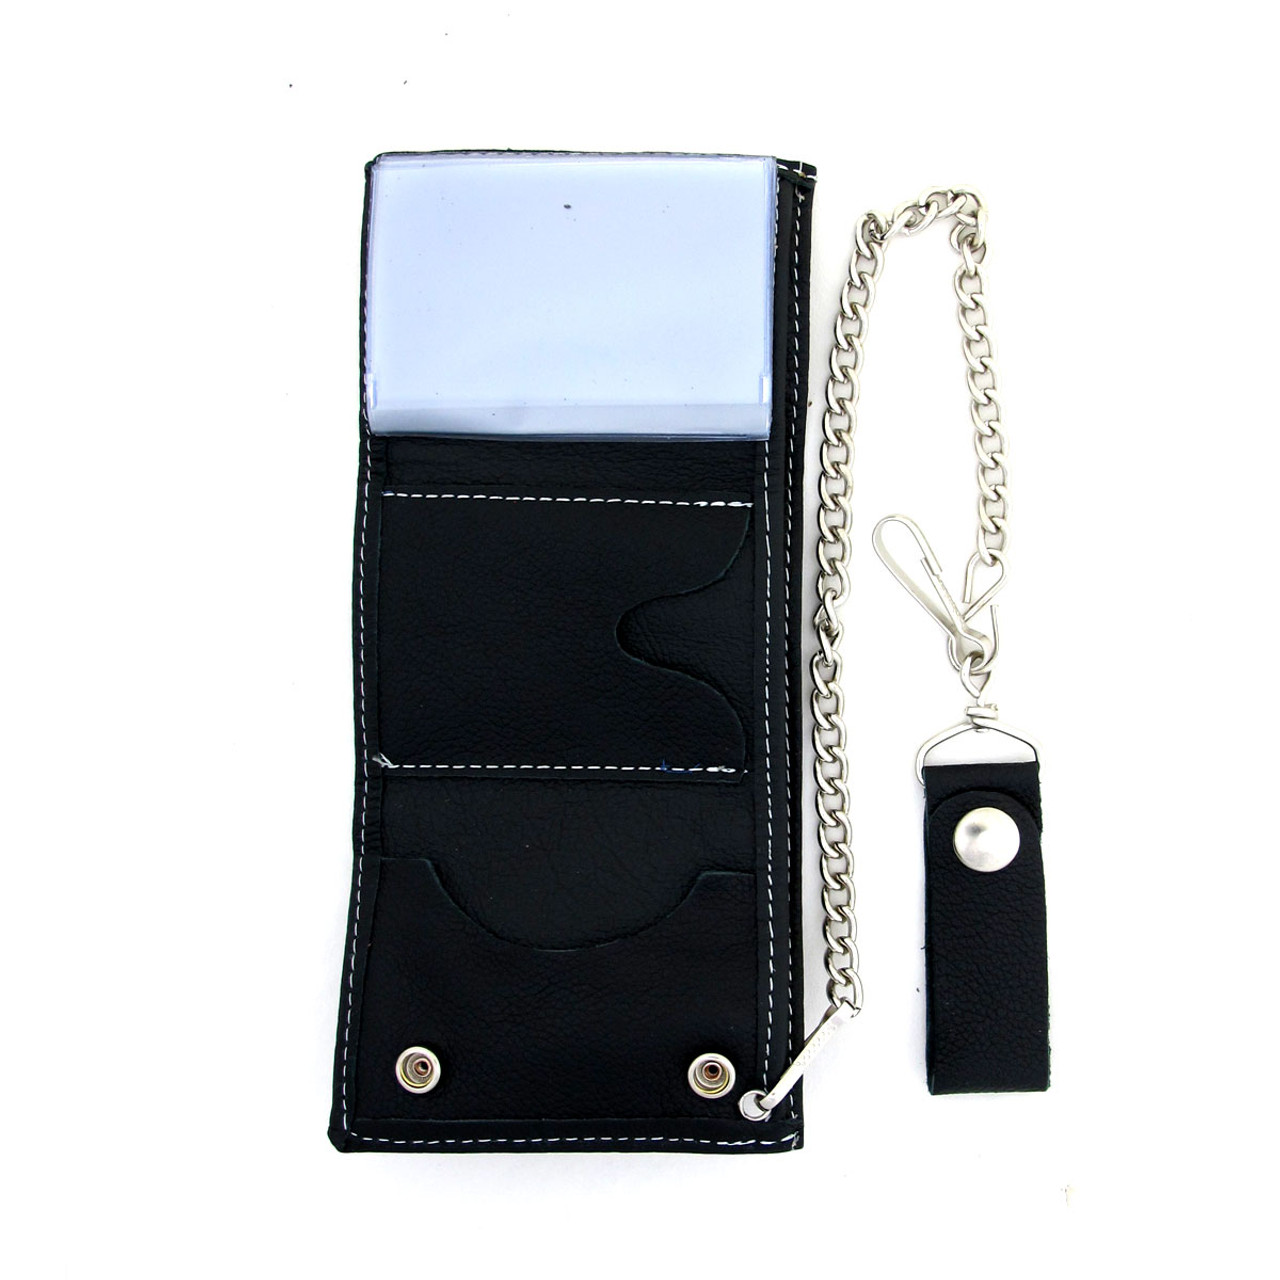 Leather Chain Wallet - 2 Colors